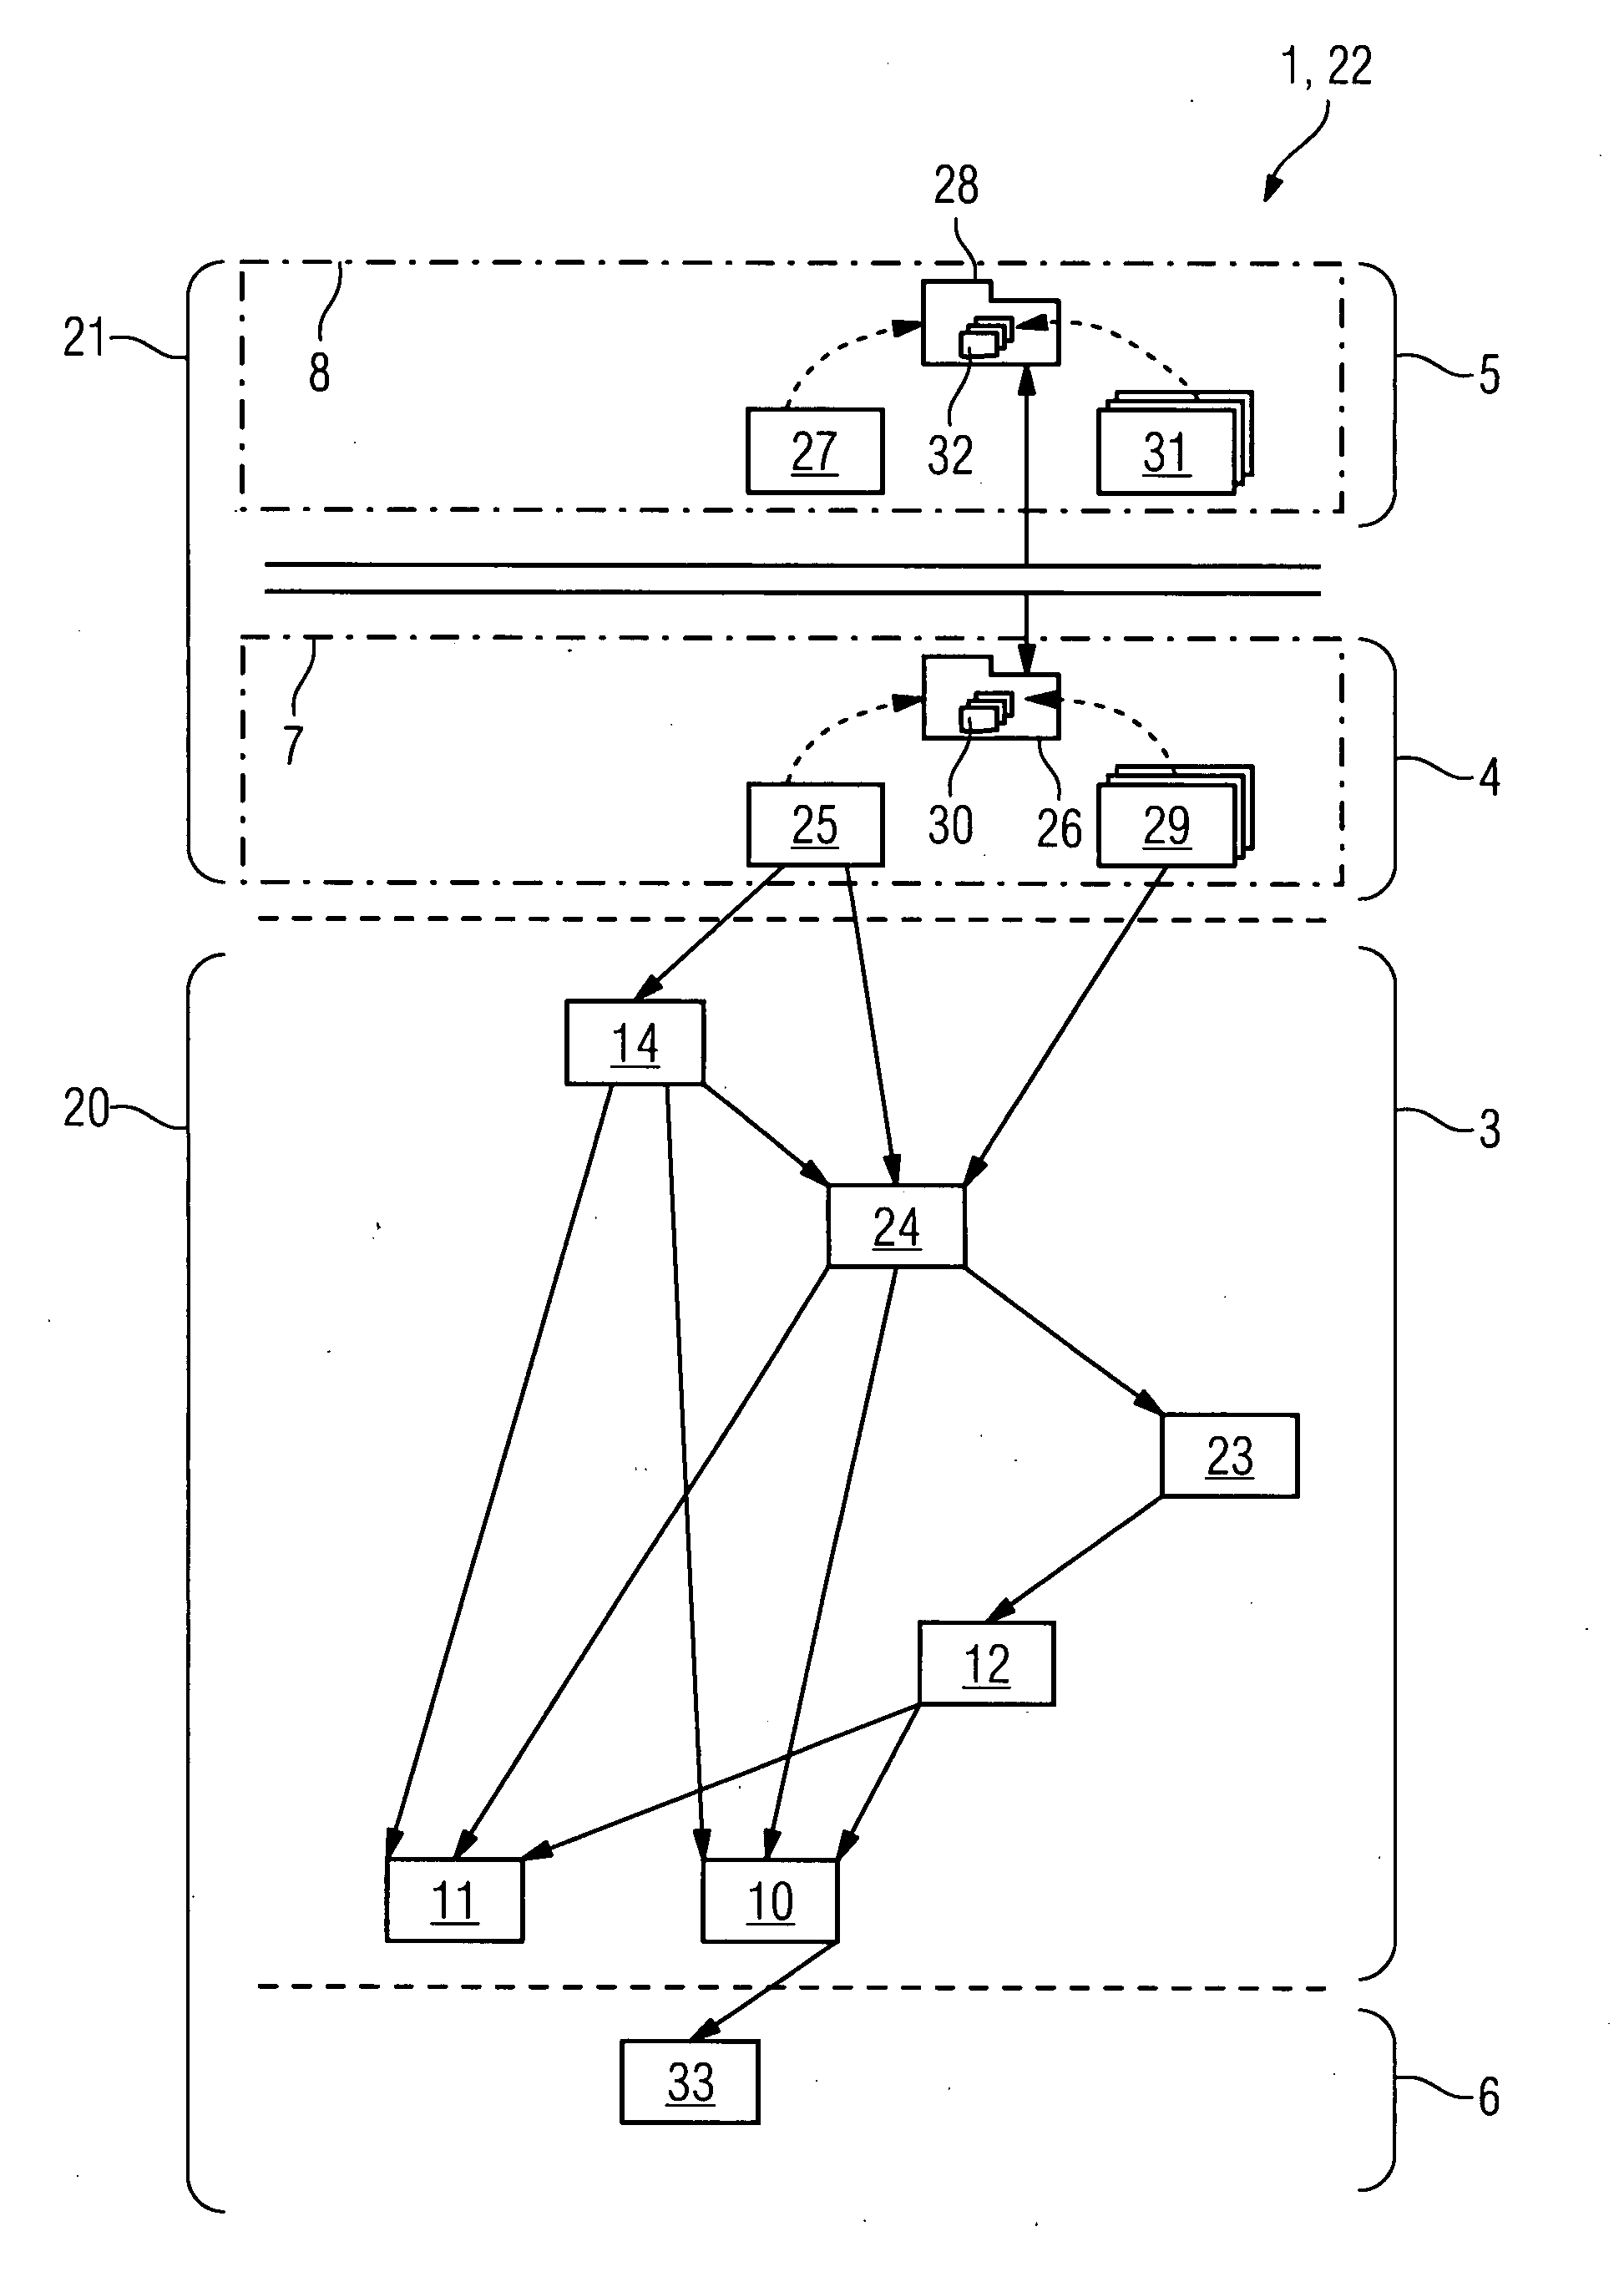 System for creating and running a software application for medical imaging